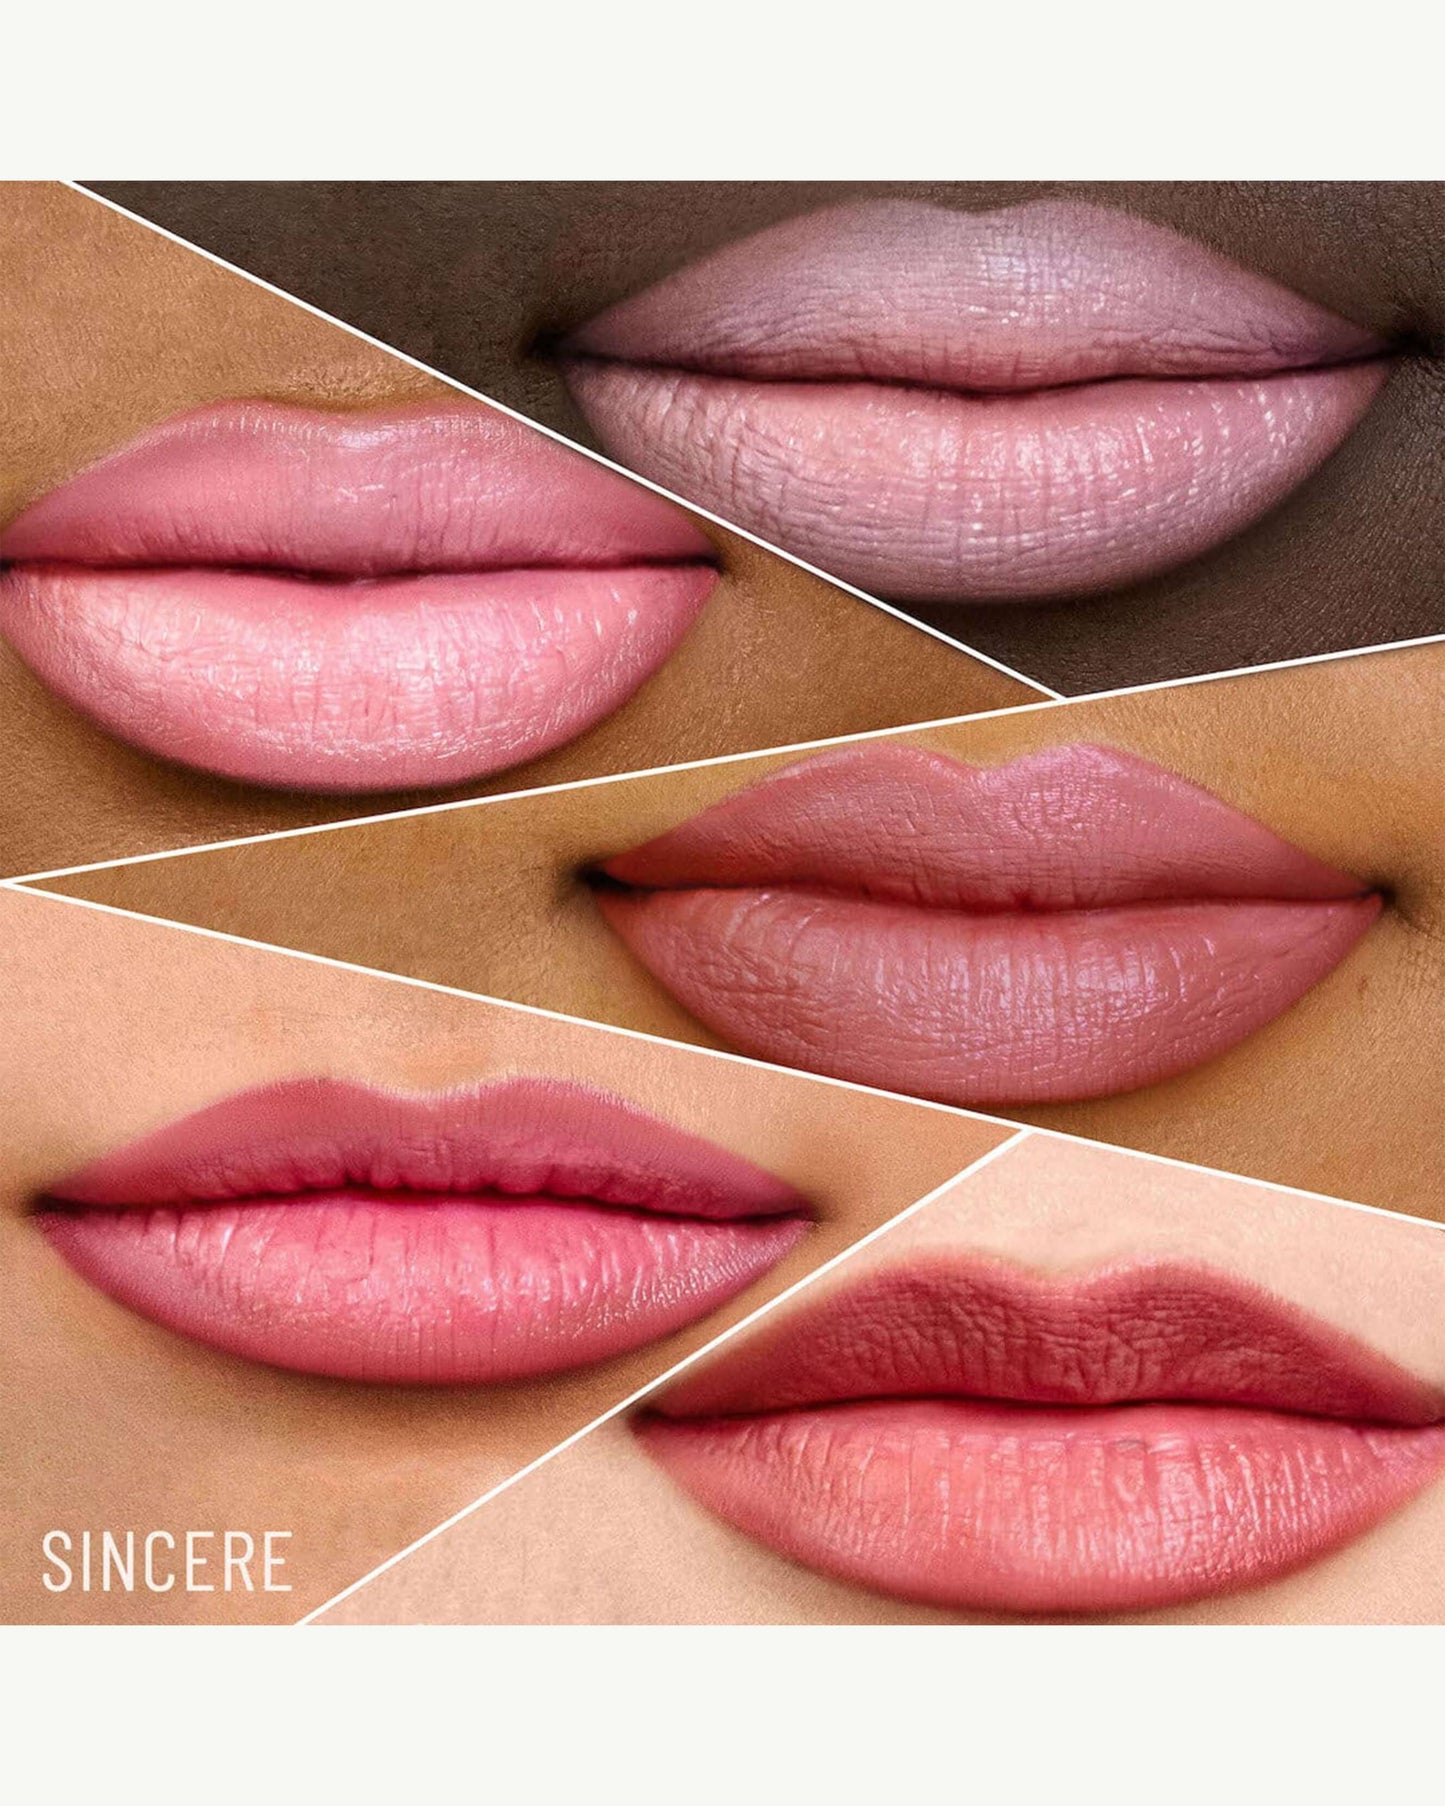 Sincere (soft nude pink)